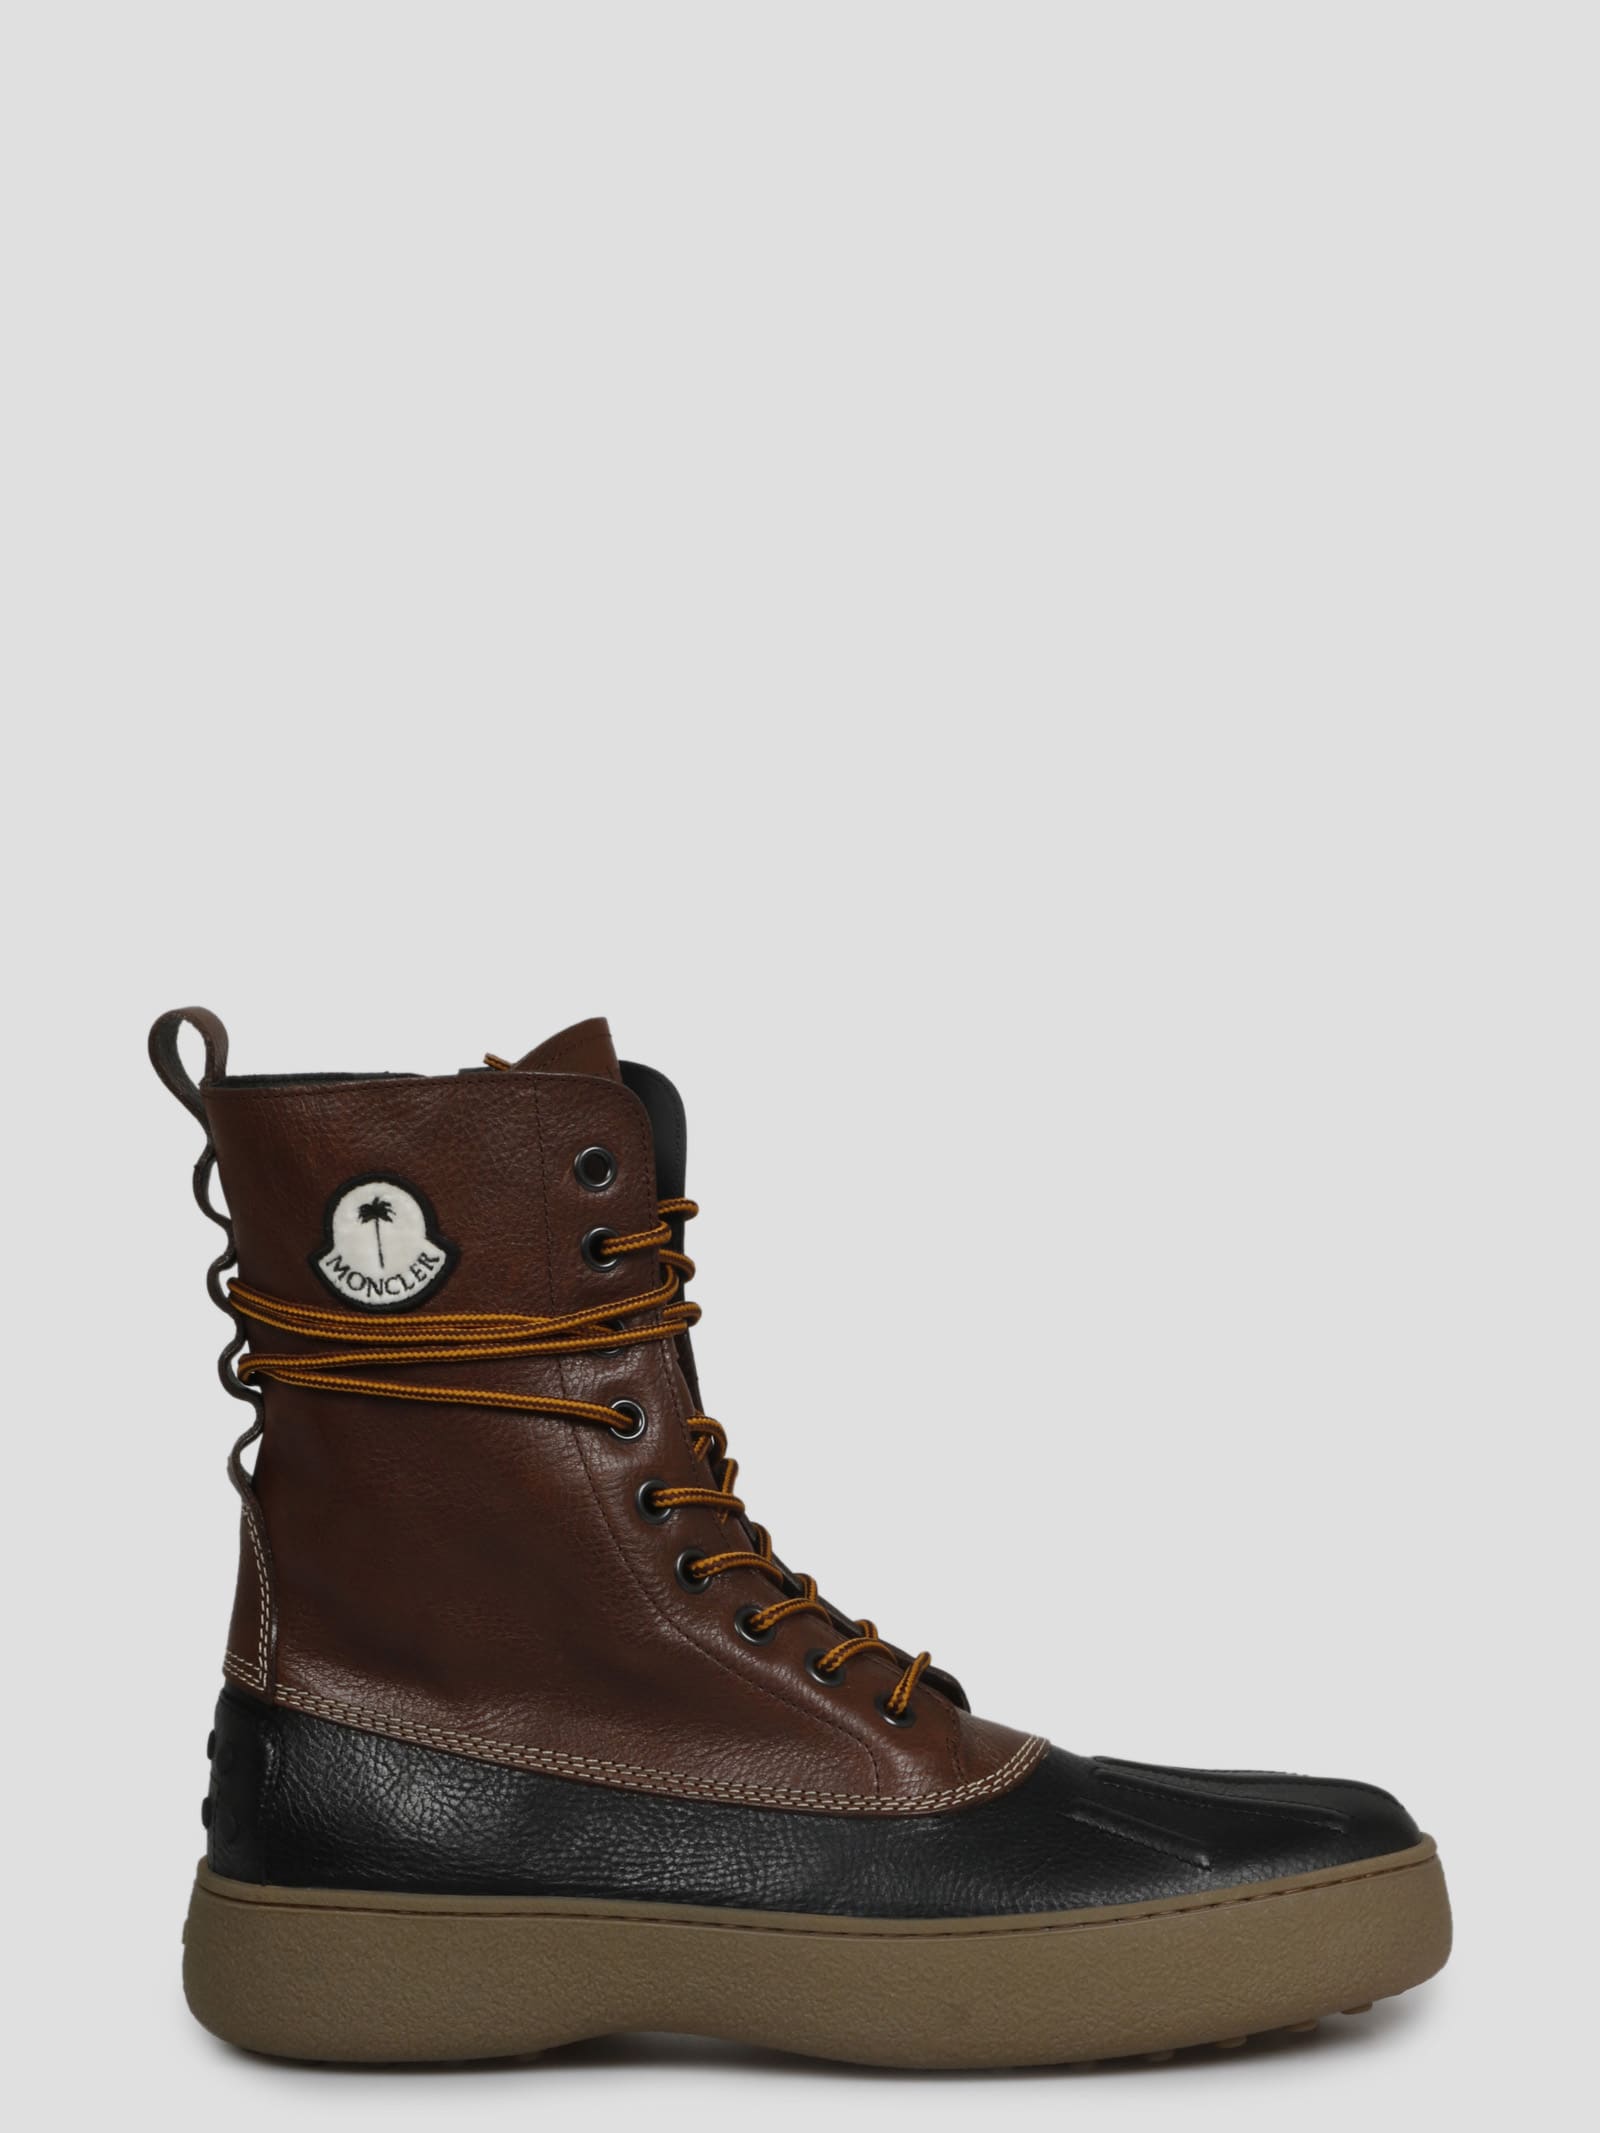 Moncler Genius W.g. Mid Leather Boots In Brown